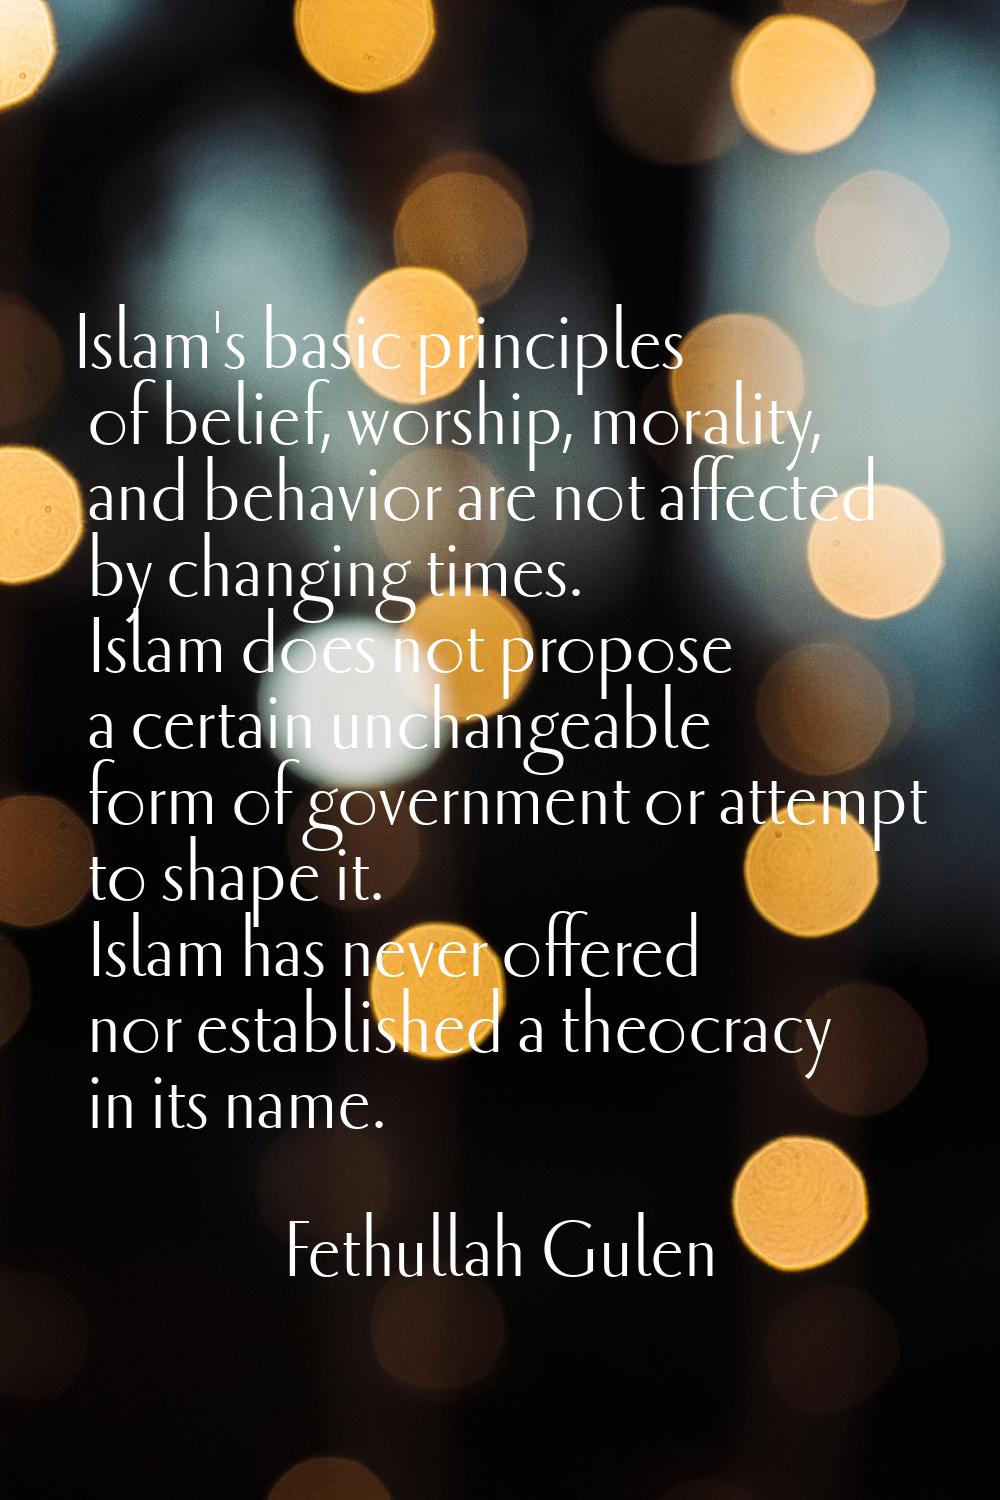 Islam's basic principles of belief, worship, morality, and behavior are not affected by changing ti